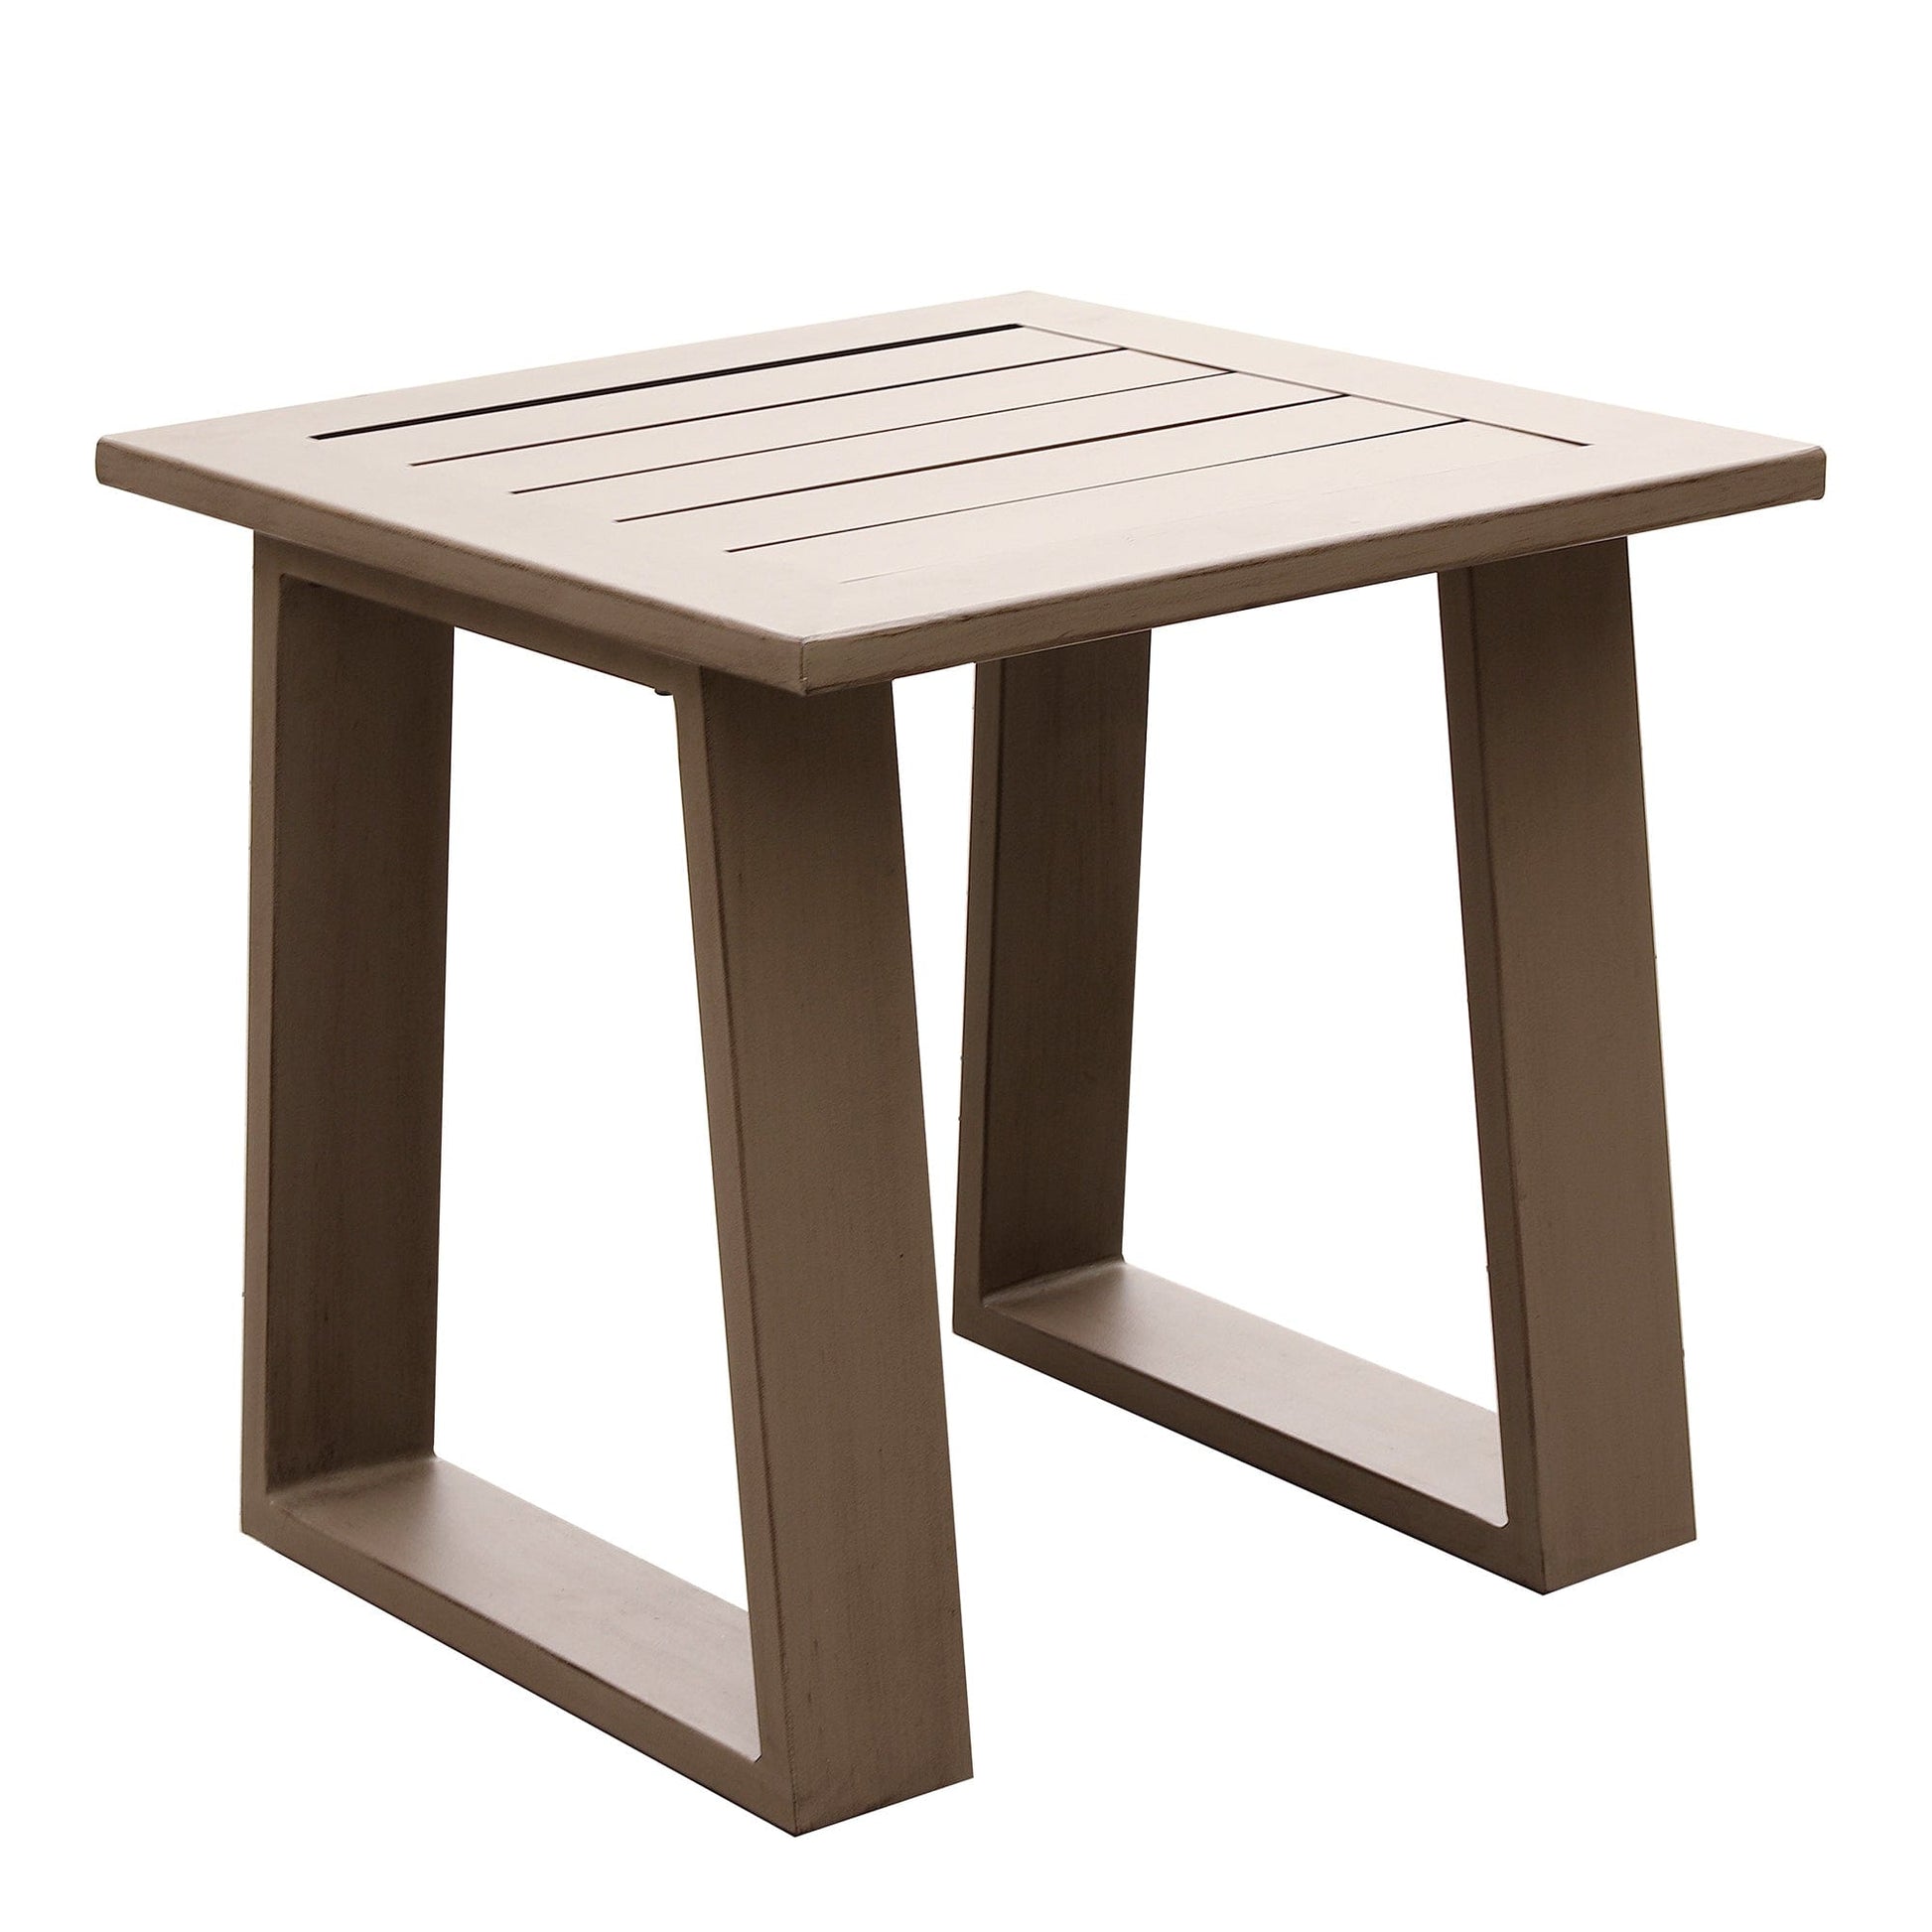 1st Choice Furniture Direct End Table 1st Choice Durable Modern Alassio's Wood Grained Aluminum End Table